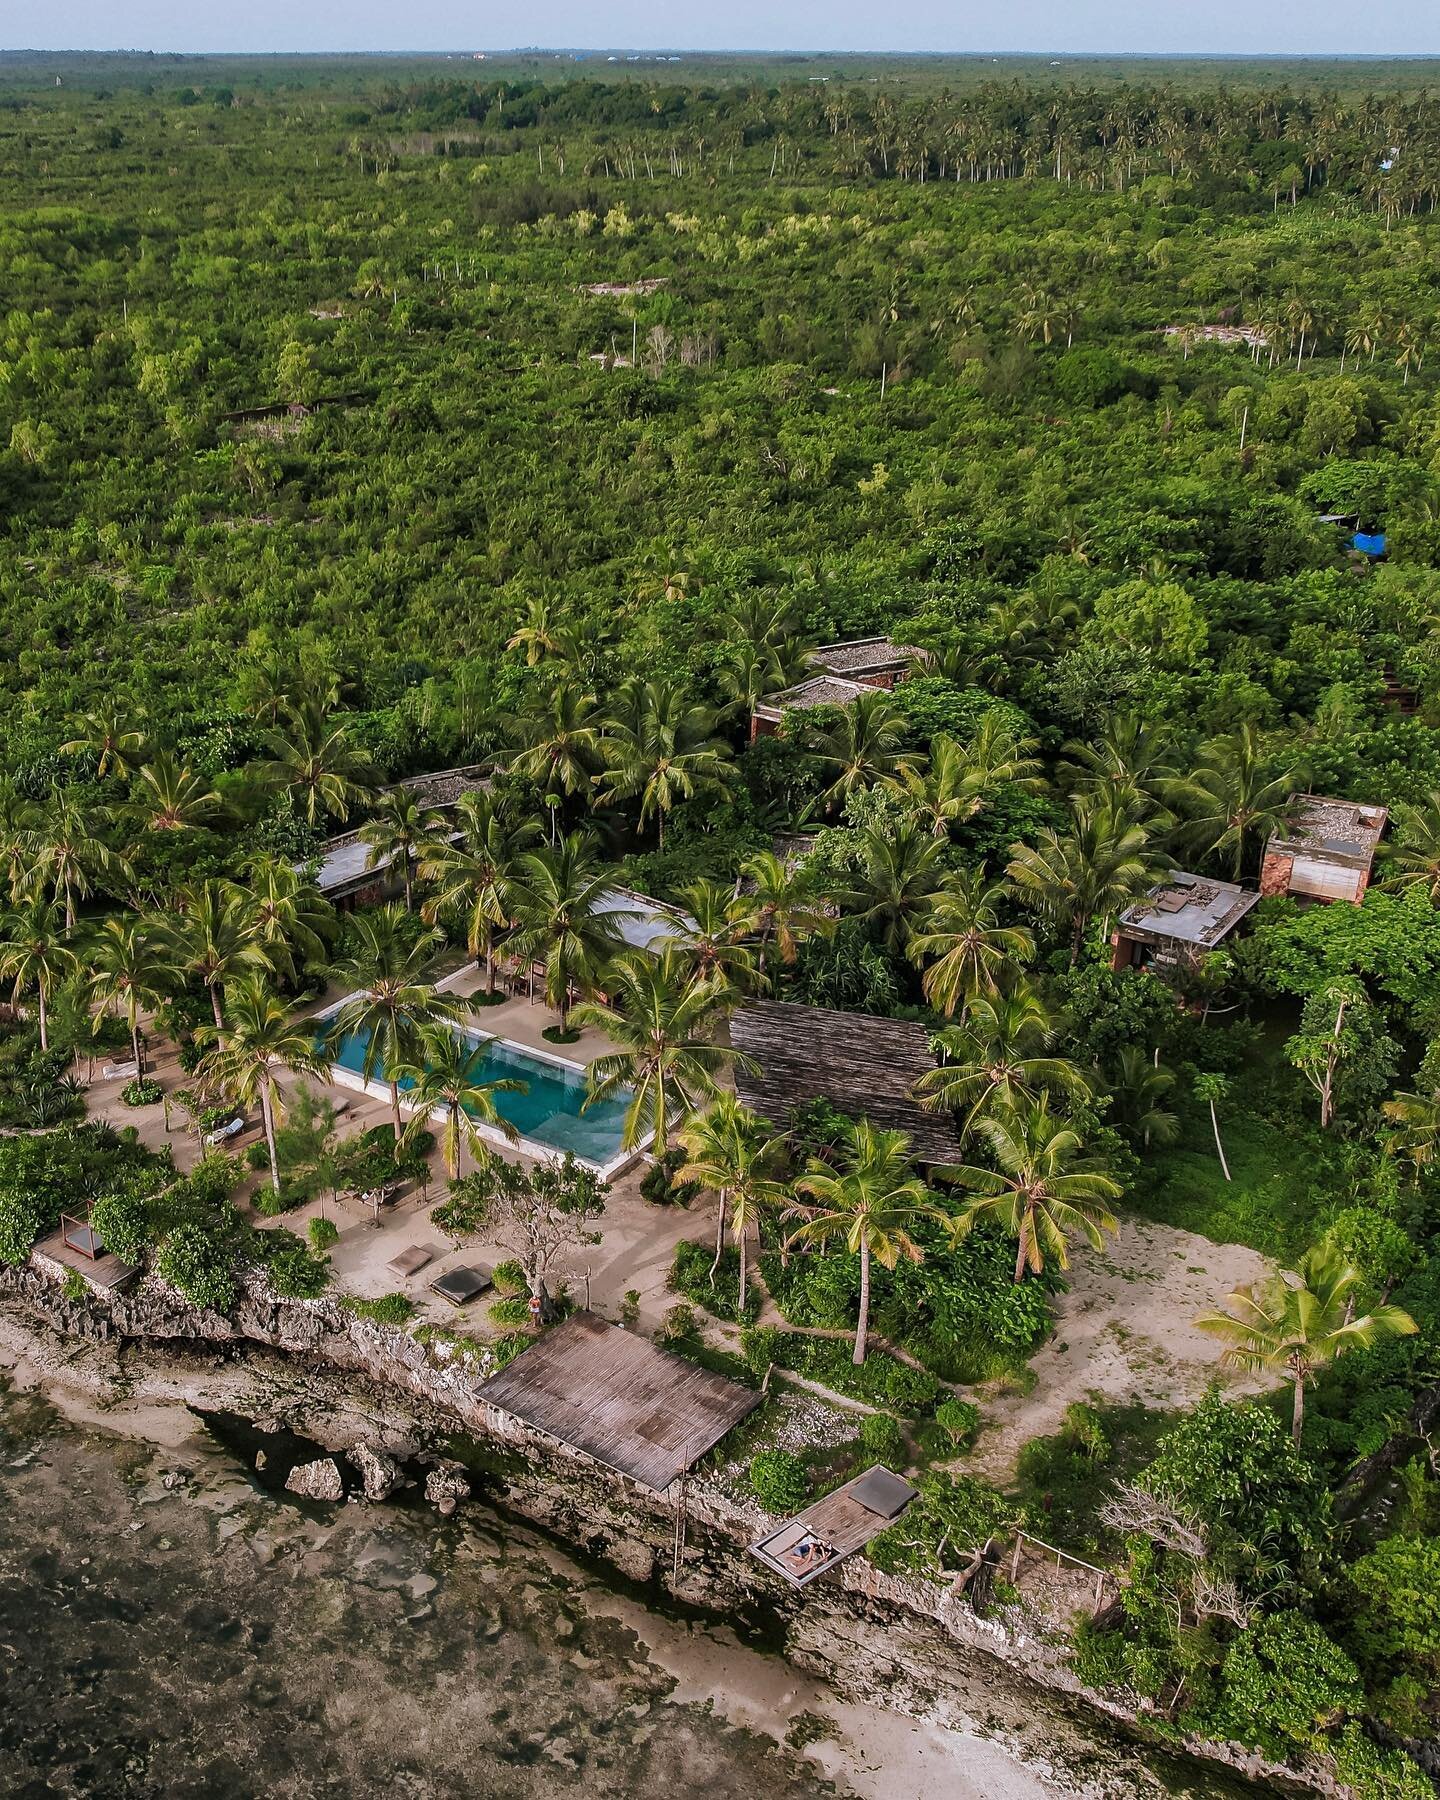 Photos from my recent visit to the Kizikula hotel, south coast of Zanzibar. It&rsquo;s a project that we have been involved with for six years with a good few years still to go. The 4 acre property started as a barren coral site with negligible topso